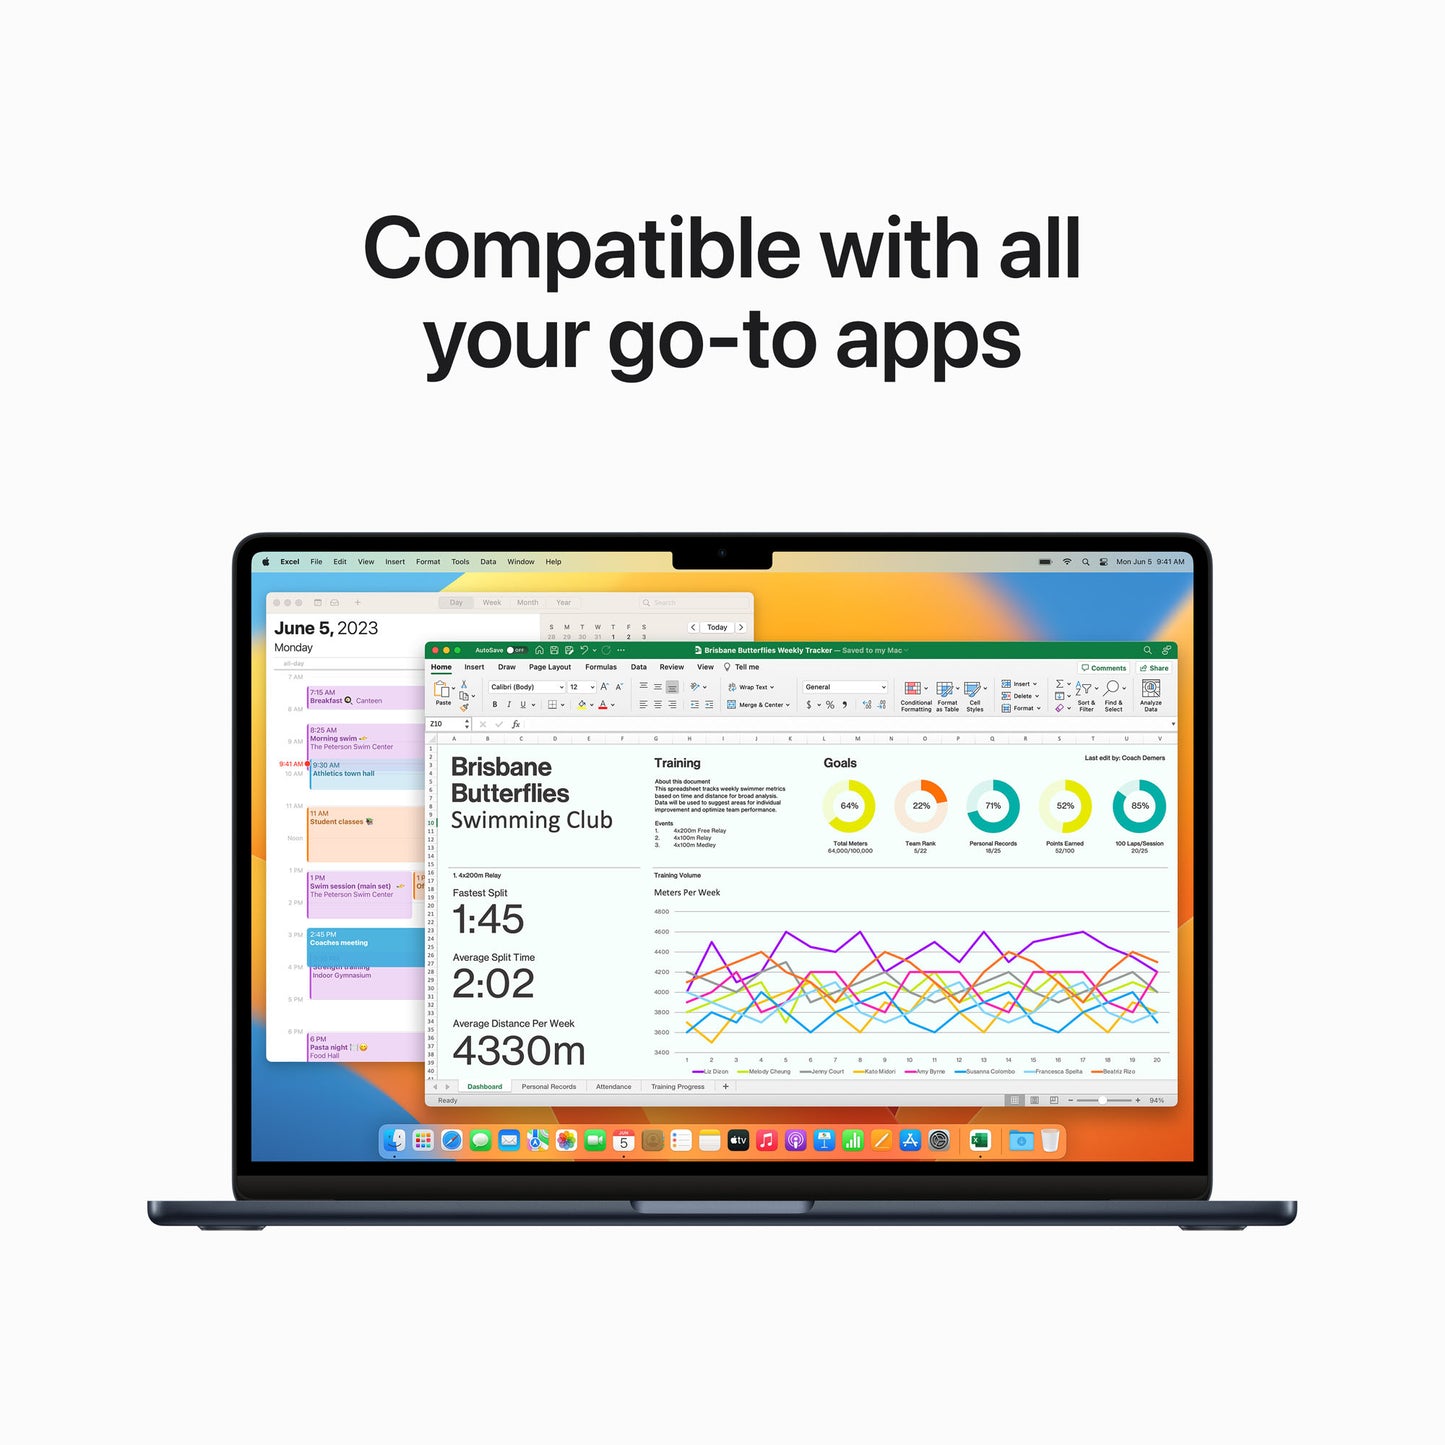 15-inch MacBook Air: Apple M2 chip with 8‑core CPU and 10‑core GPU, 256GB SSD - Midnight